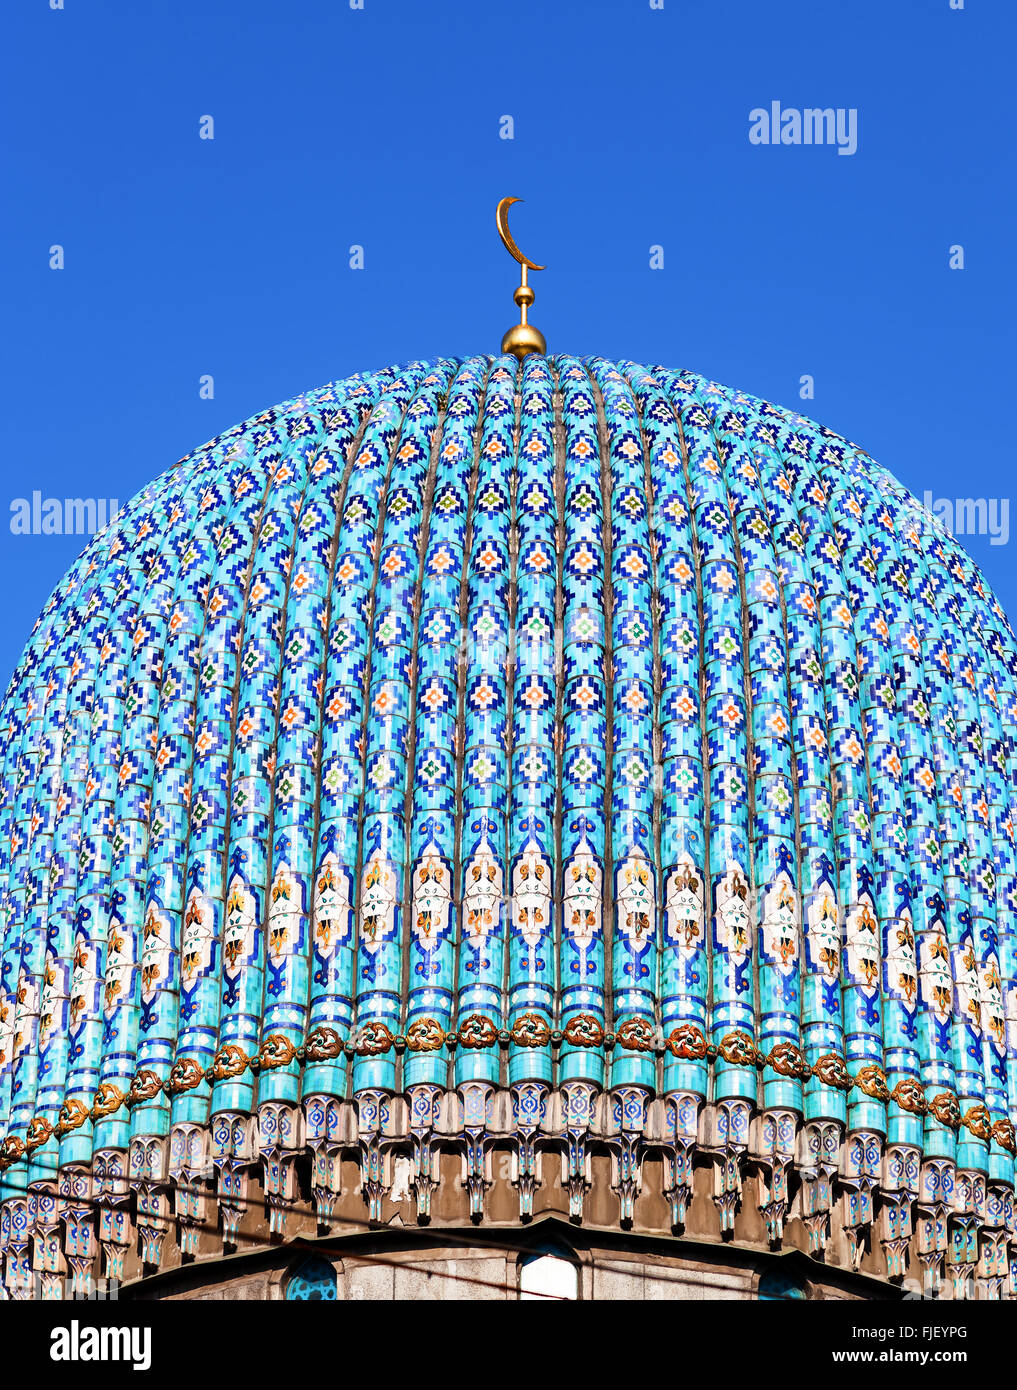 Dome of the St. Petersburg Cathedral Mosque against blue sky Stock Photo